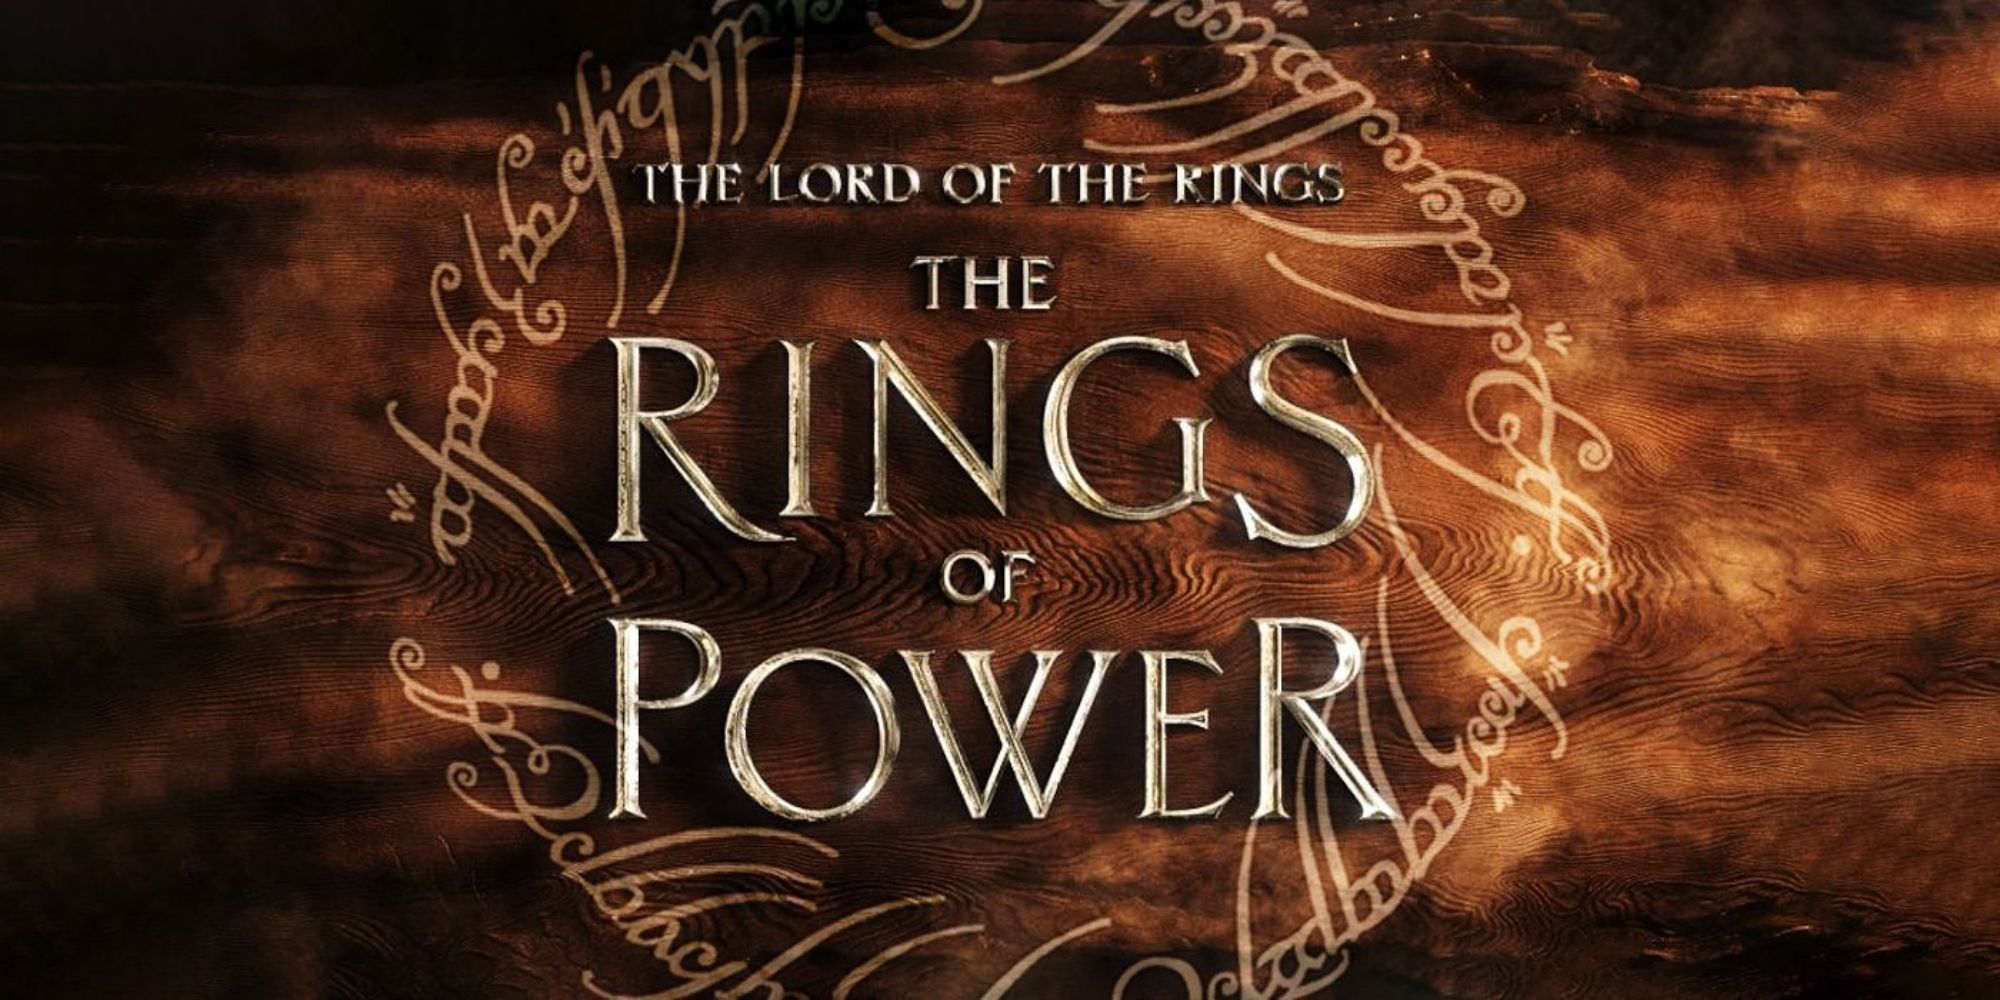 Calam Lynch Set To Play Celeborn in 's 'The Rings of Power' Season 2  - Knight Edge Media